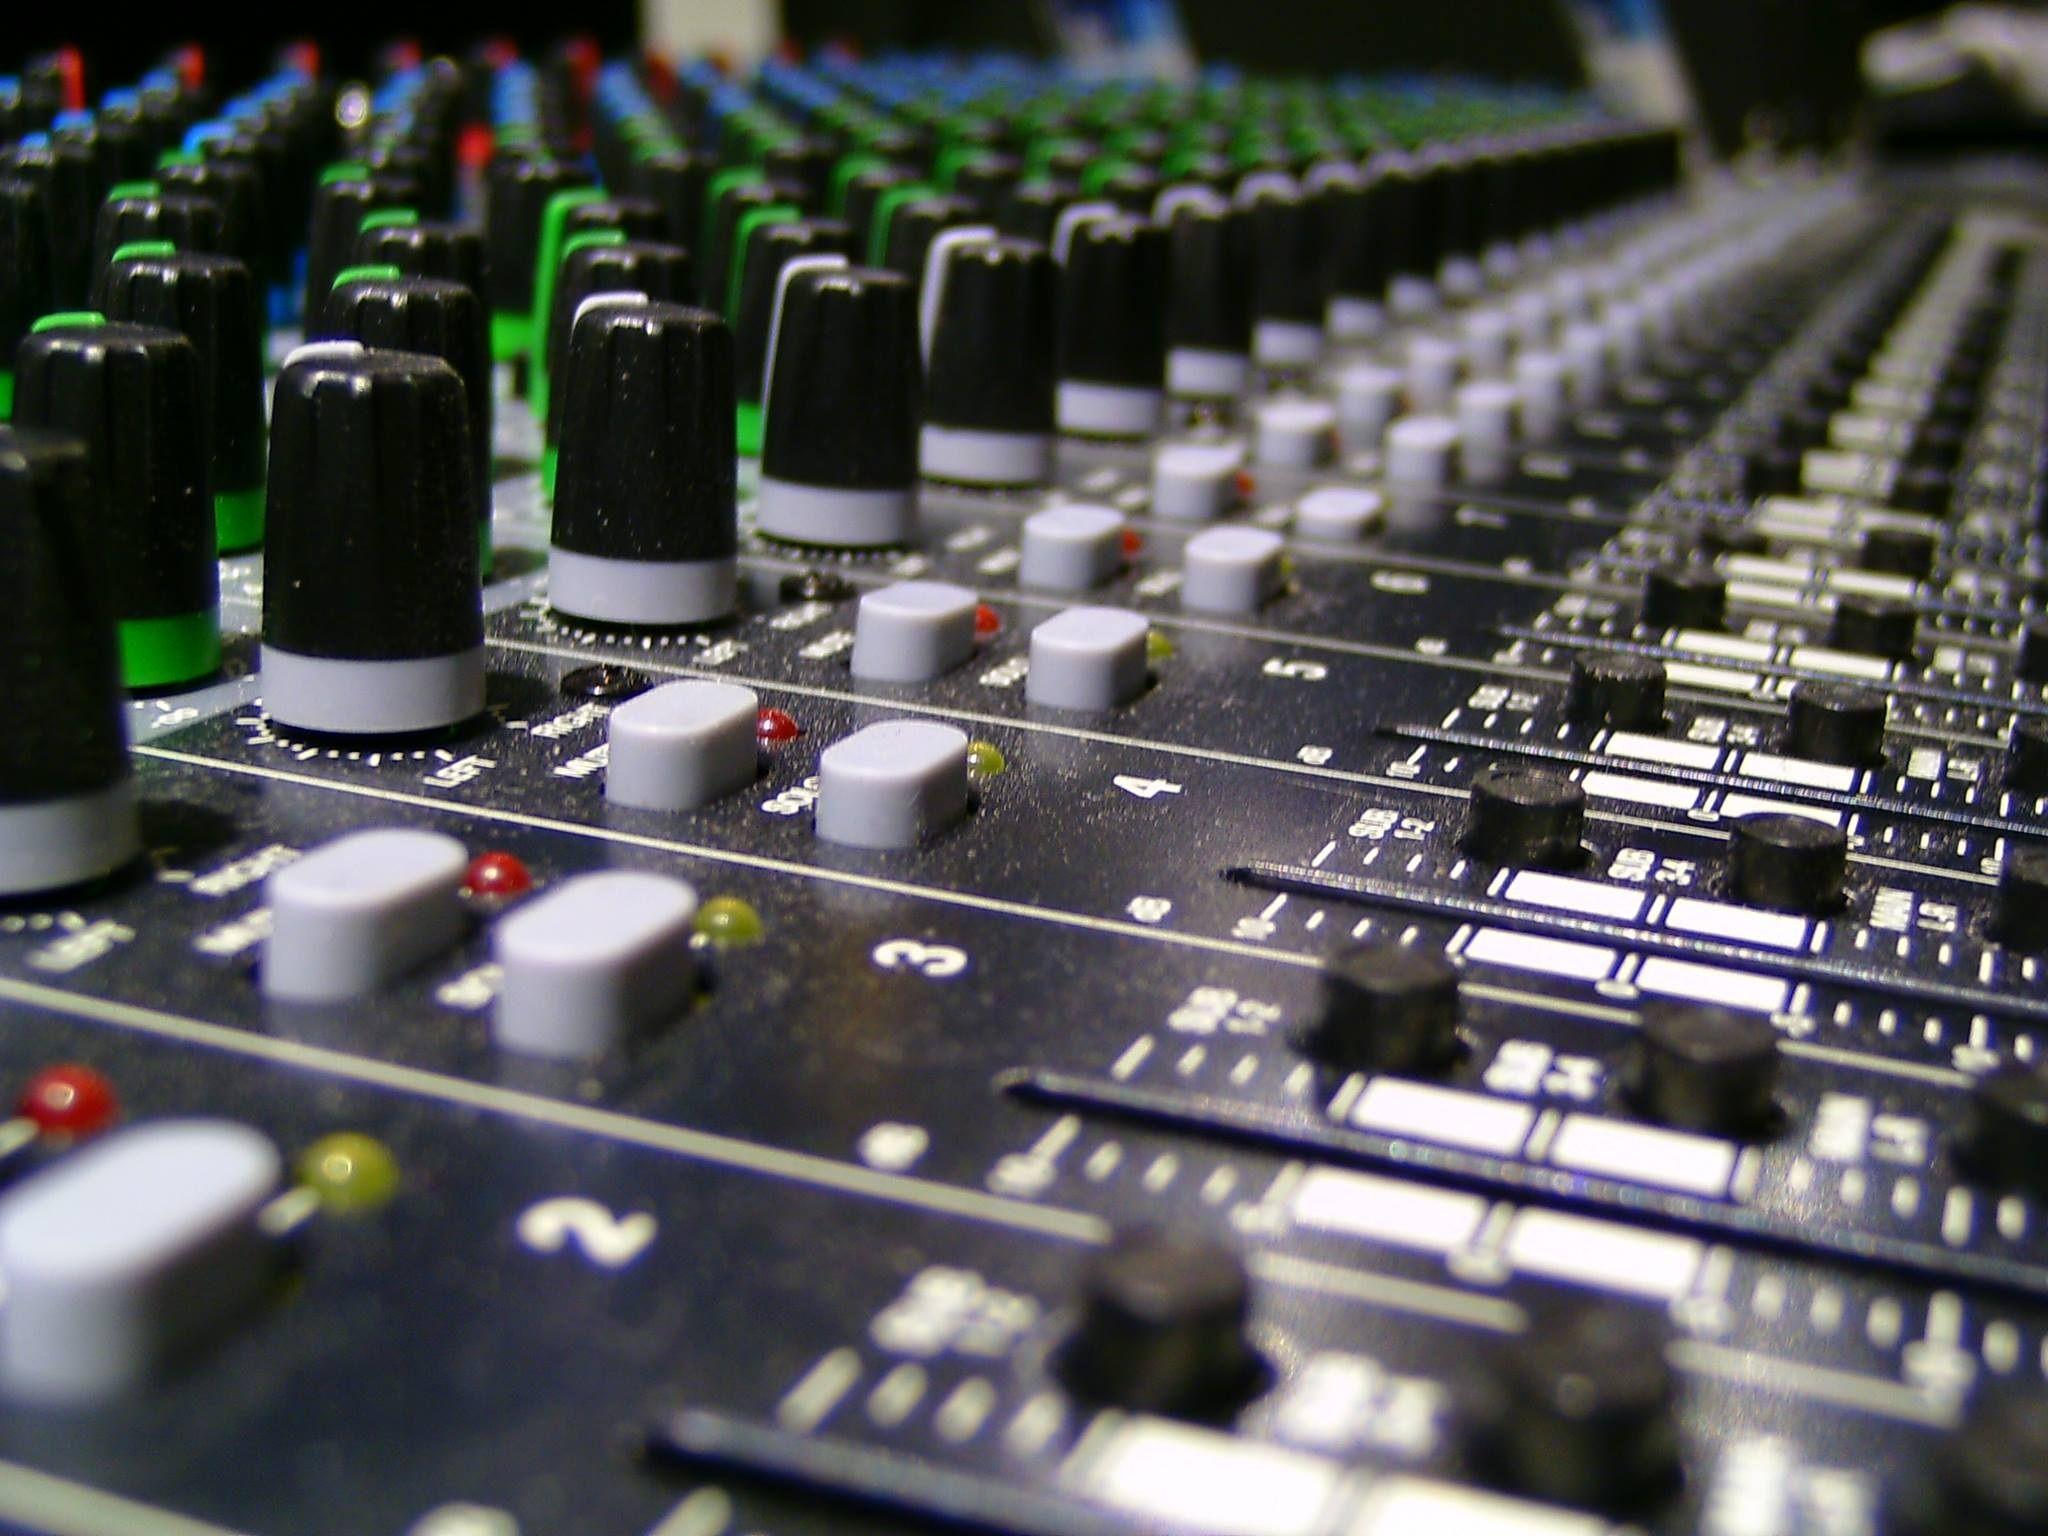 Free Image, technology, controller, recording, electronics, sound